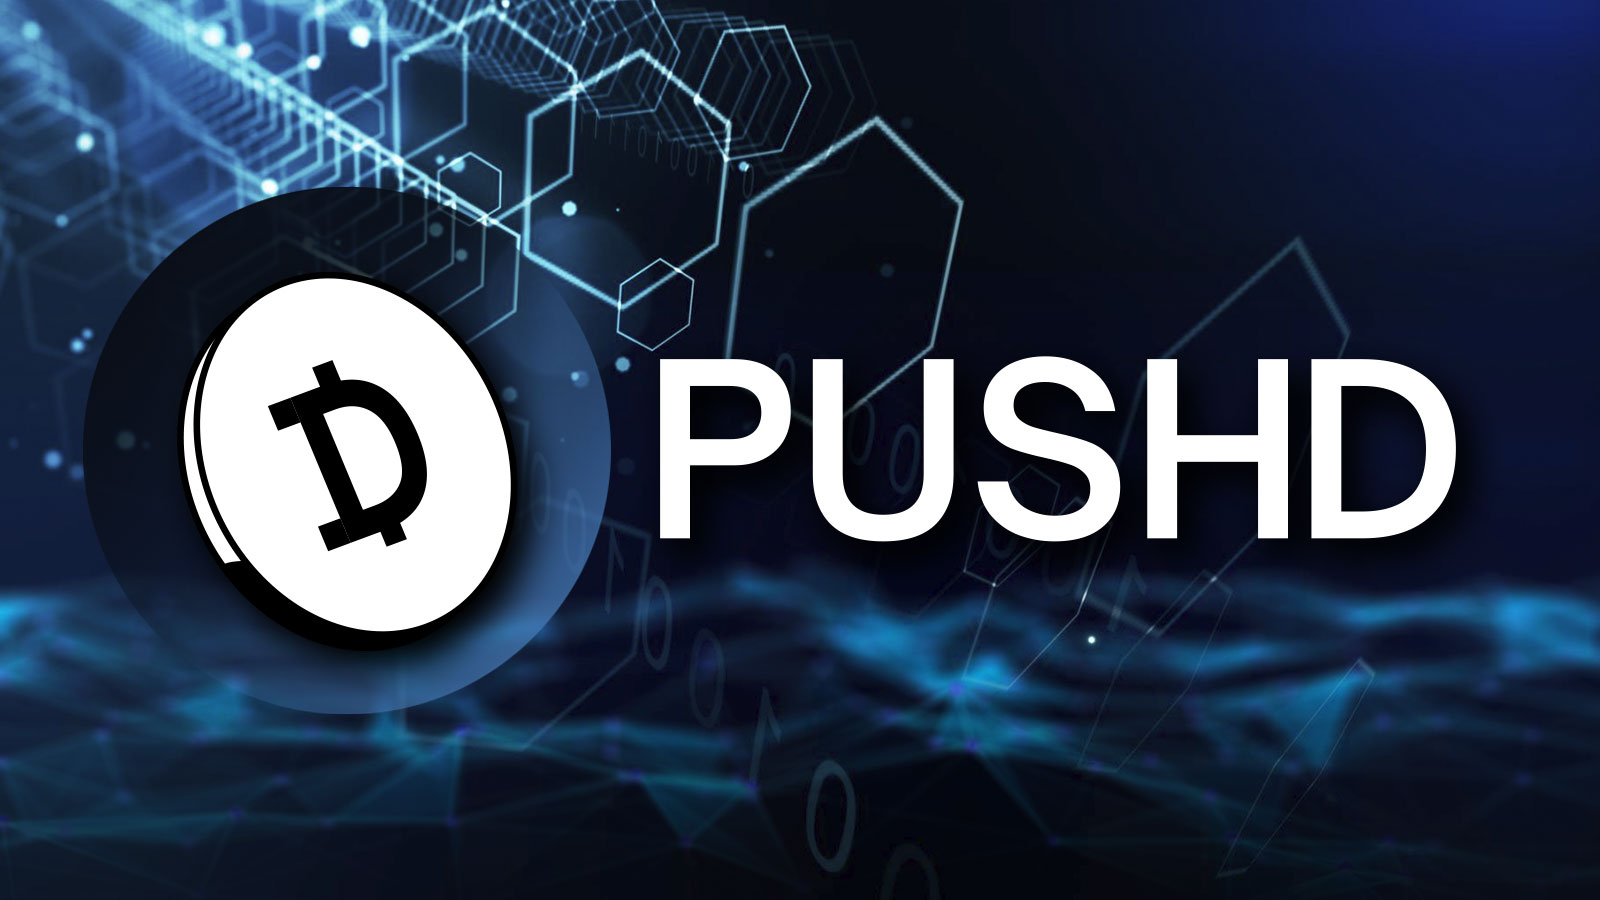 Pushd (PUSHD) Pre-Sale Enters New Stage in February while Tron (TRX) and Binance Coin (BNB) Top Altcoins Set New Trading Volumes Highs